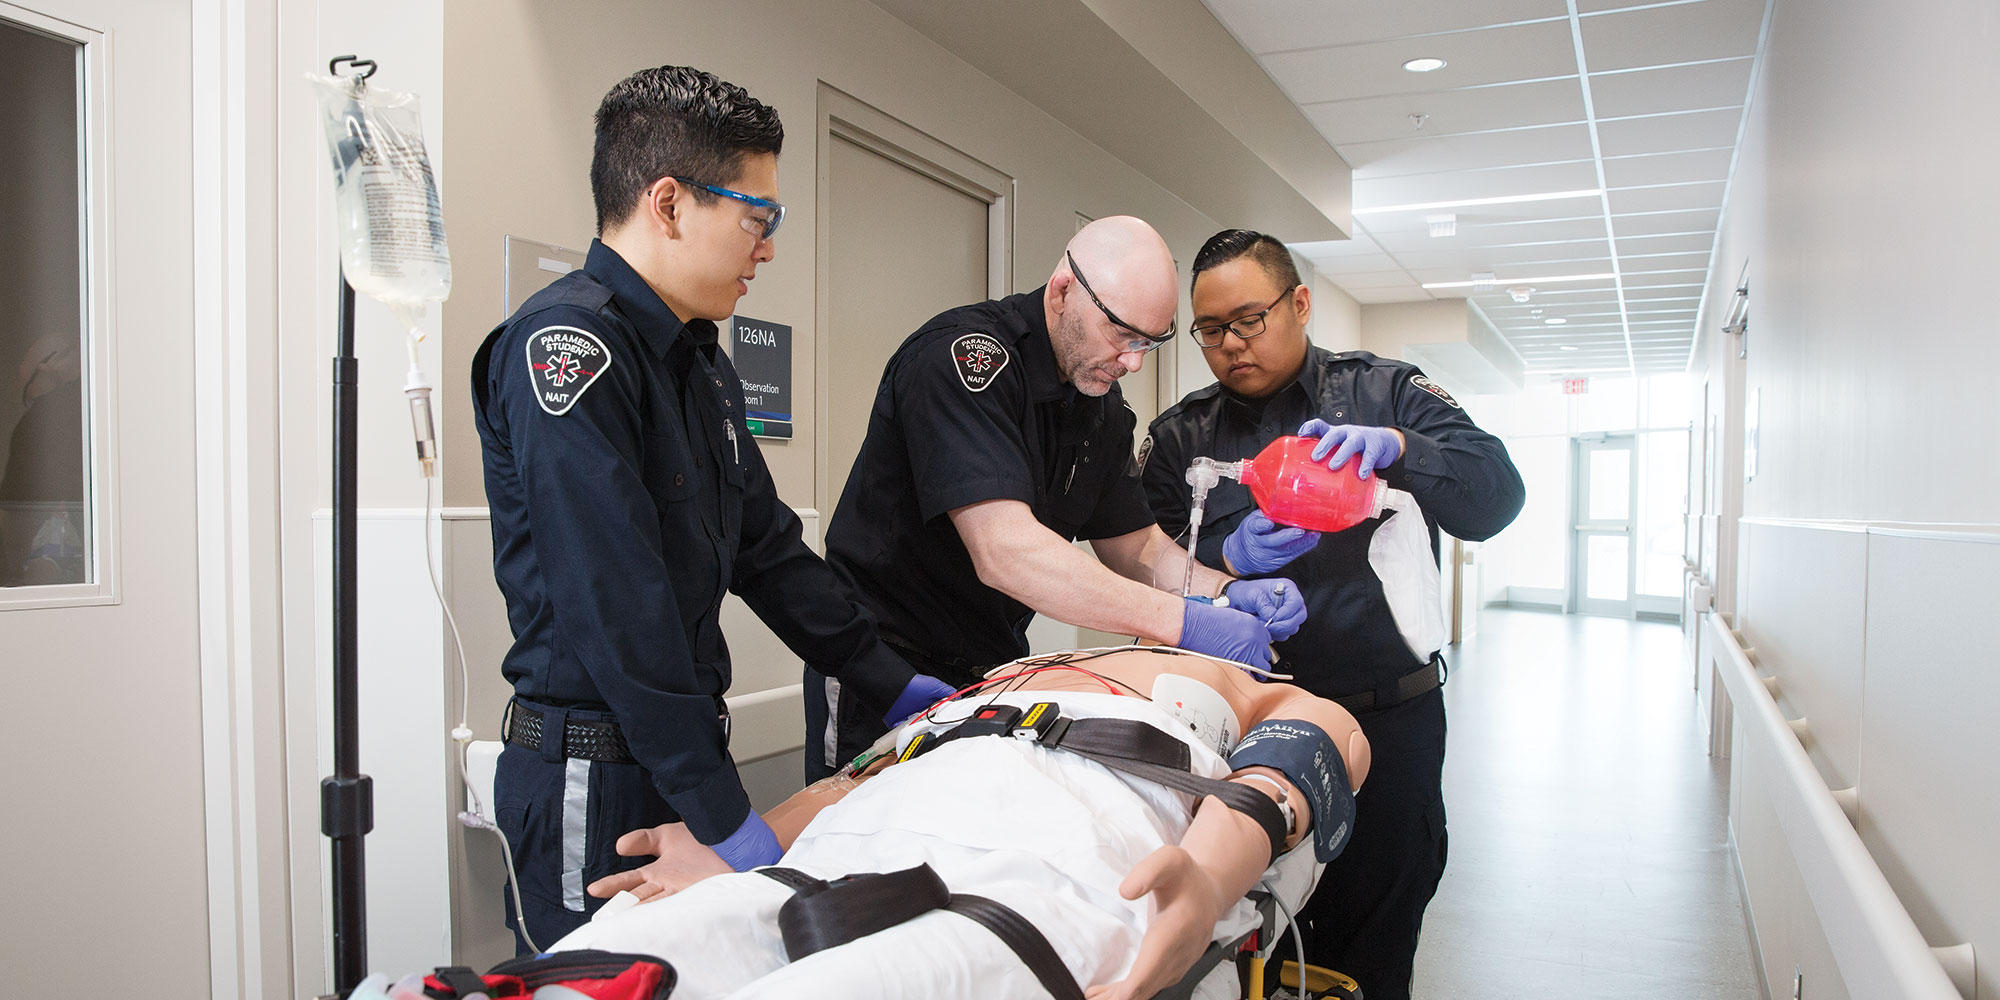 A new frontier in hands-on health-care training - techlifetoday